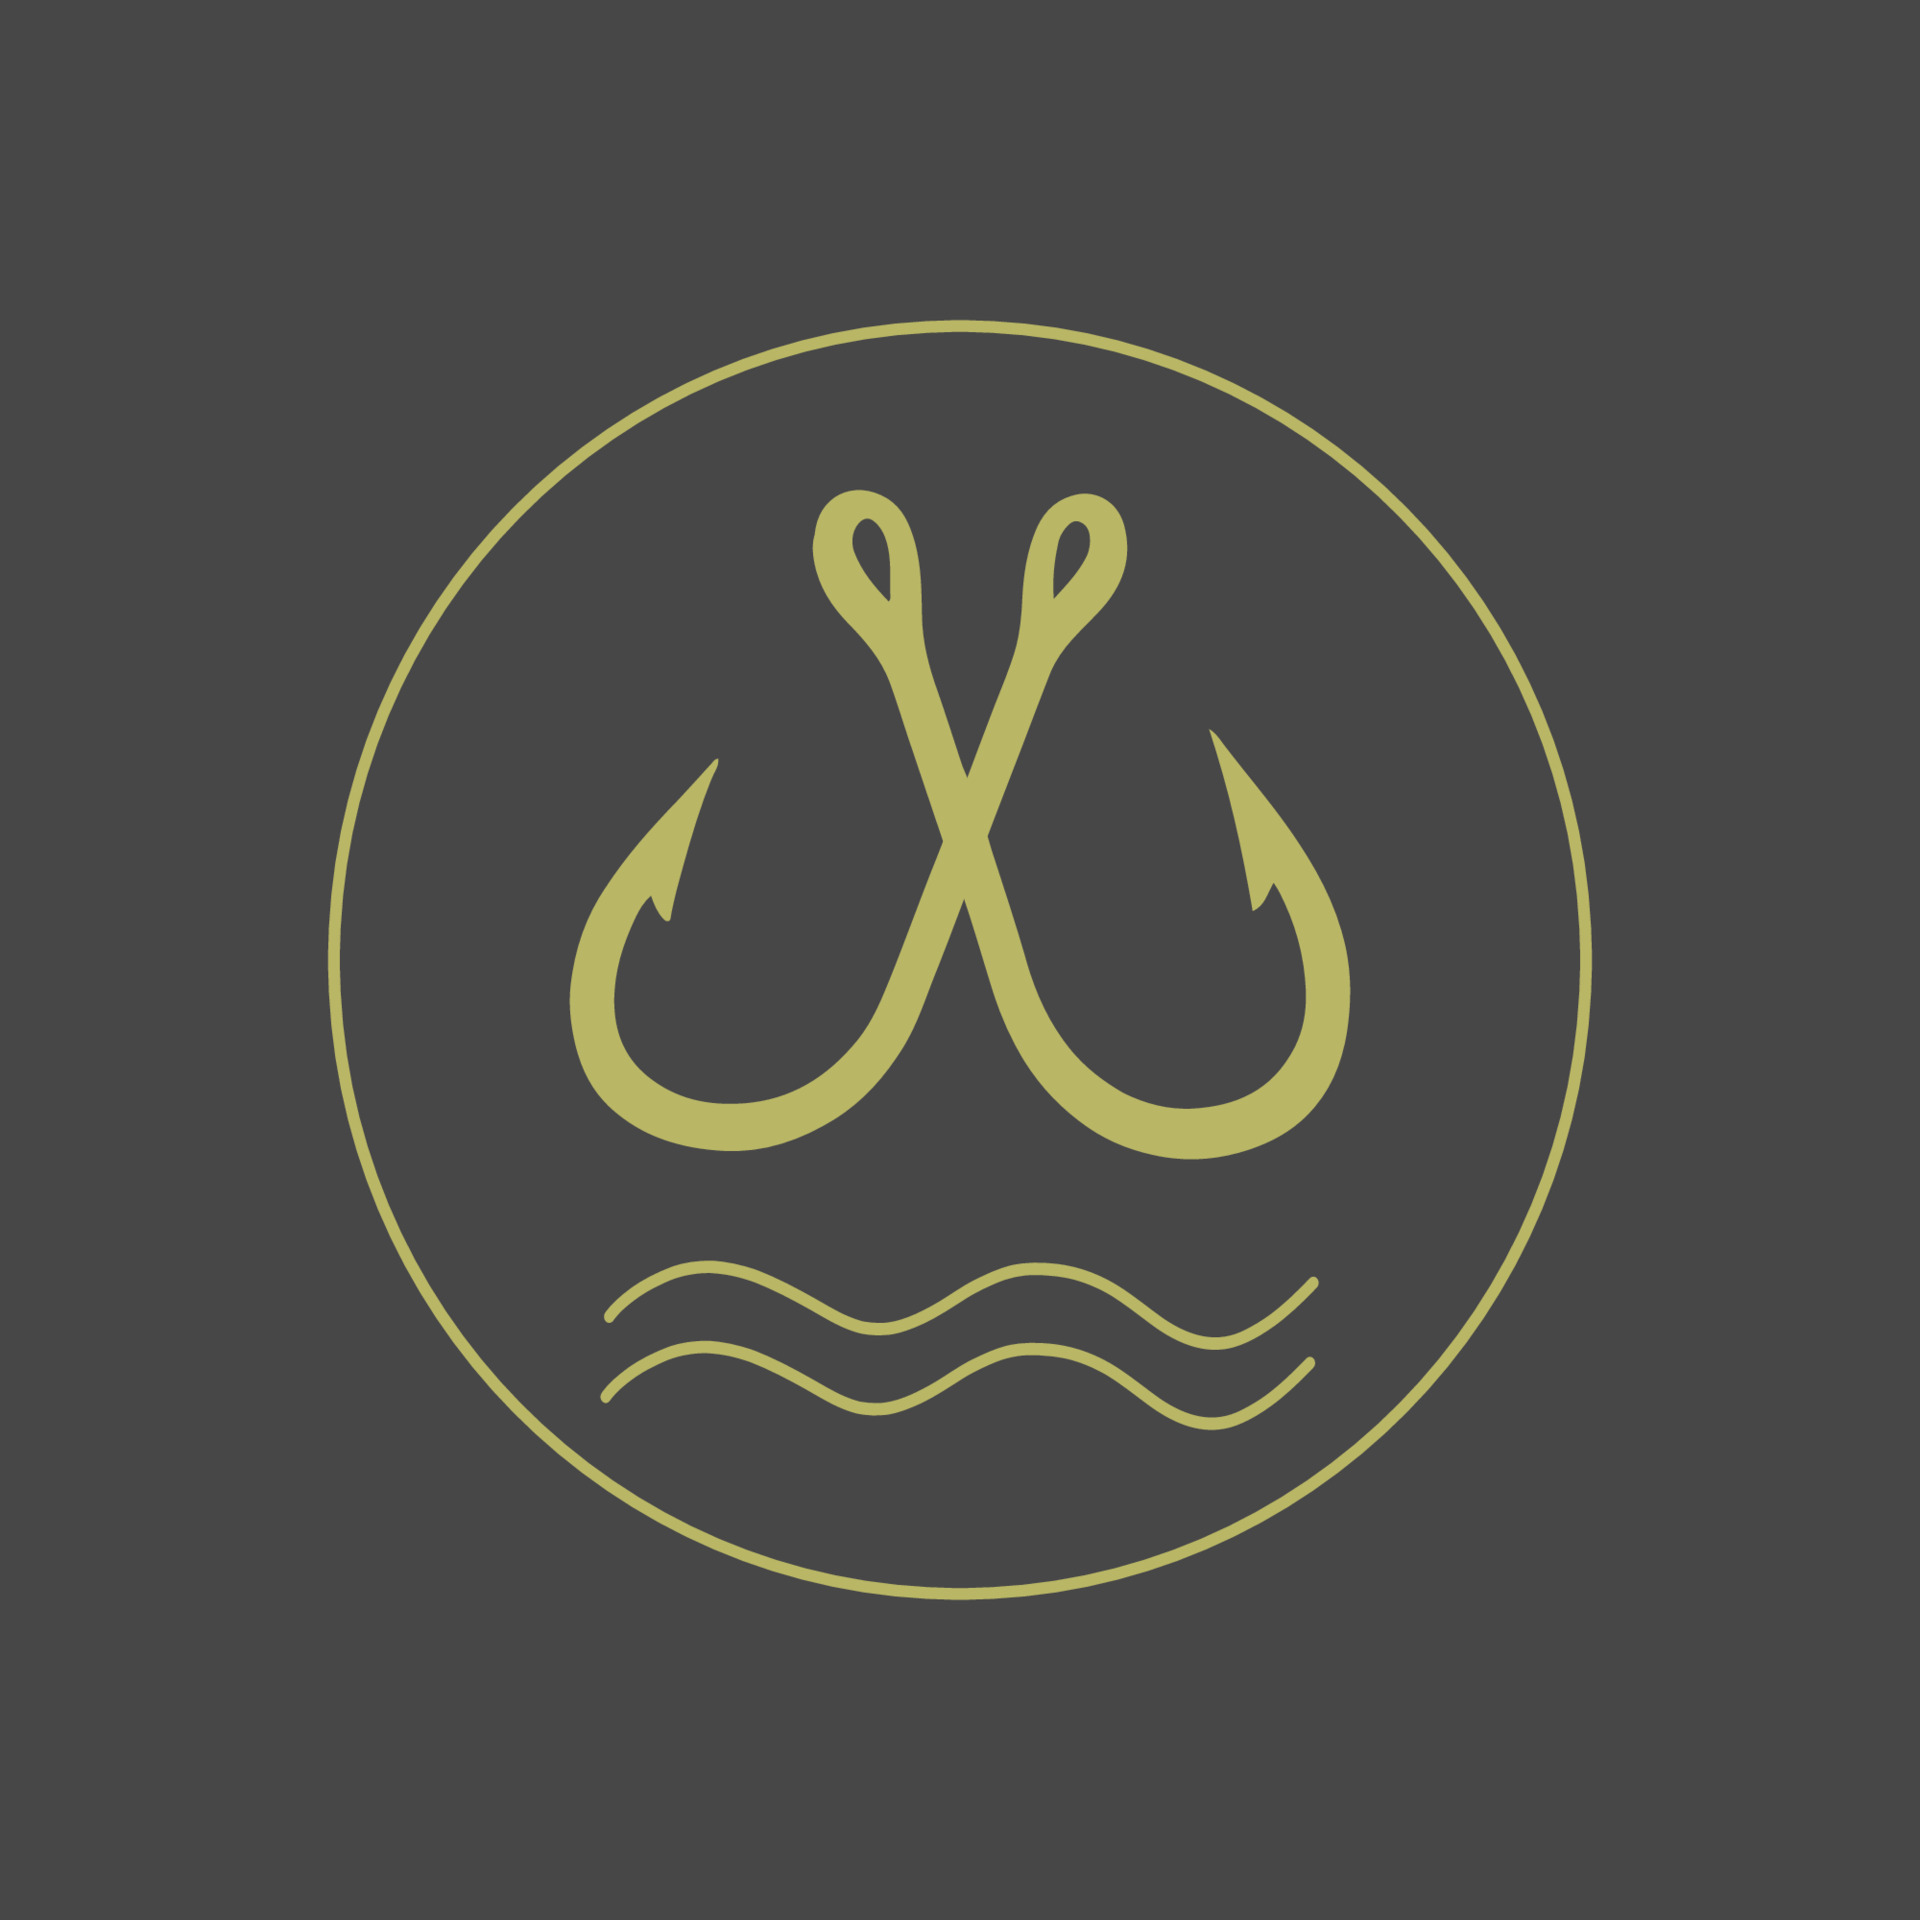 https://static.vecteezy.com/system/resources/previews/012/873/867/original/gold-fishing-hook-sticker-emblem-for-your-fishing-boat-logo-for-fish-buisness-black-background-vector.jpg